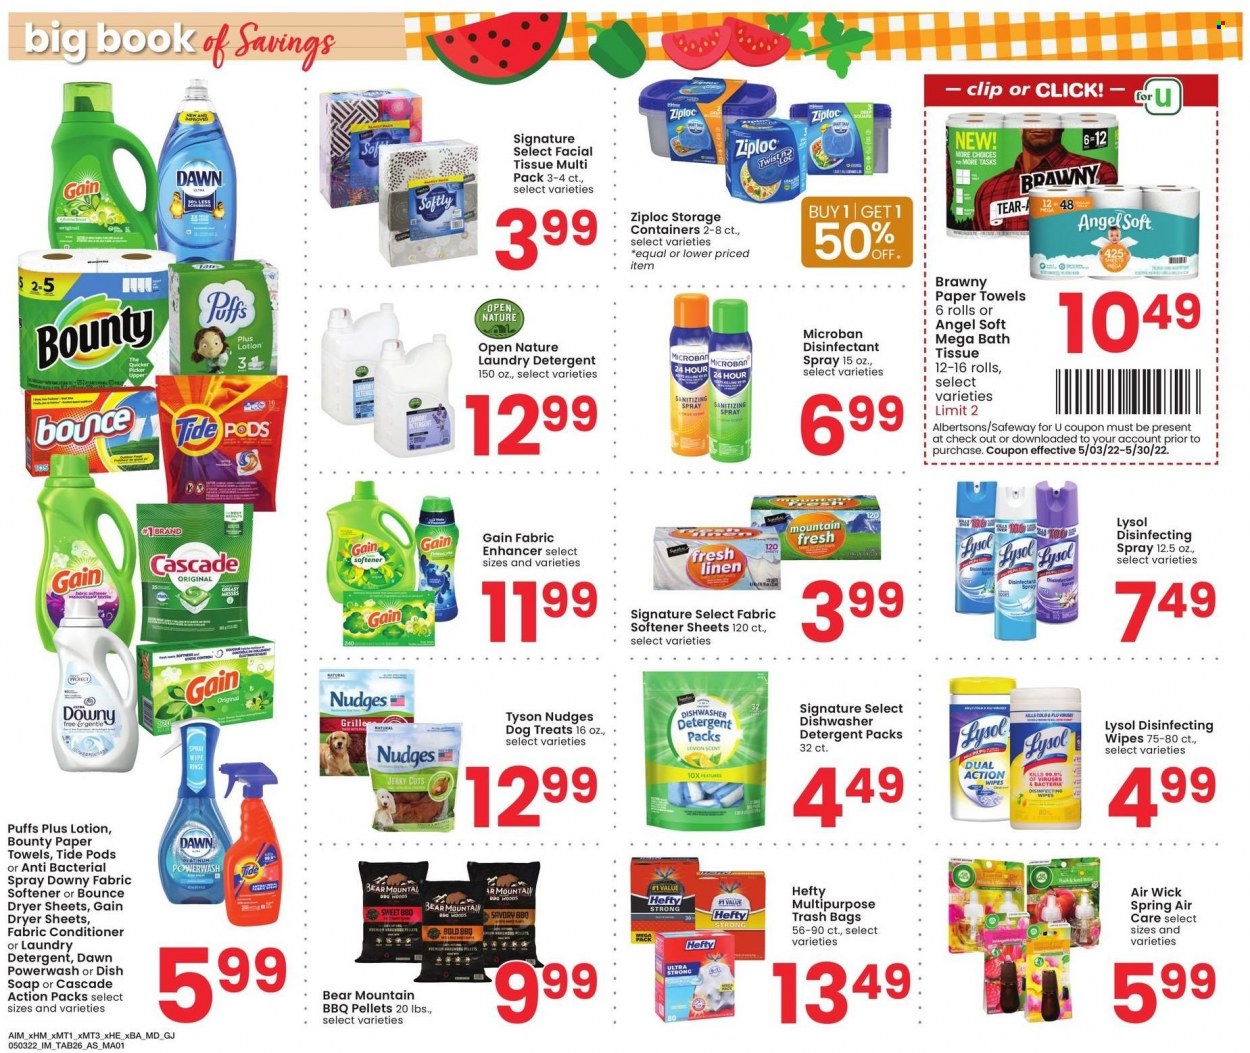 thumbnail - Albertsons Flyer - 05/03/2022 - 05/30/2022 - Sales products - puffs, jerky, Bounty, wipes, bath tissue, kitchen towels, paper towels, detergent, Gain, desinfection, Lysol, Cascade, Tide, fabric softener, laundry detergent, Bounce, dryer sheets, Downy Laundry, soap, Ziploc, Hefty, trash bags, storage box, Air Wick. Page 26.